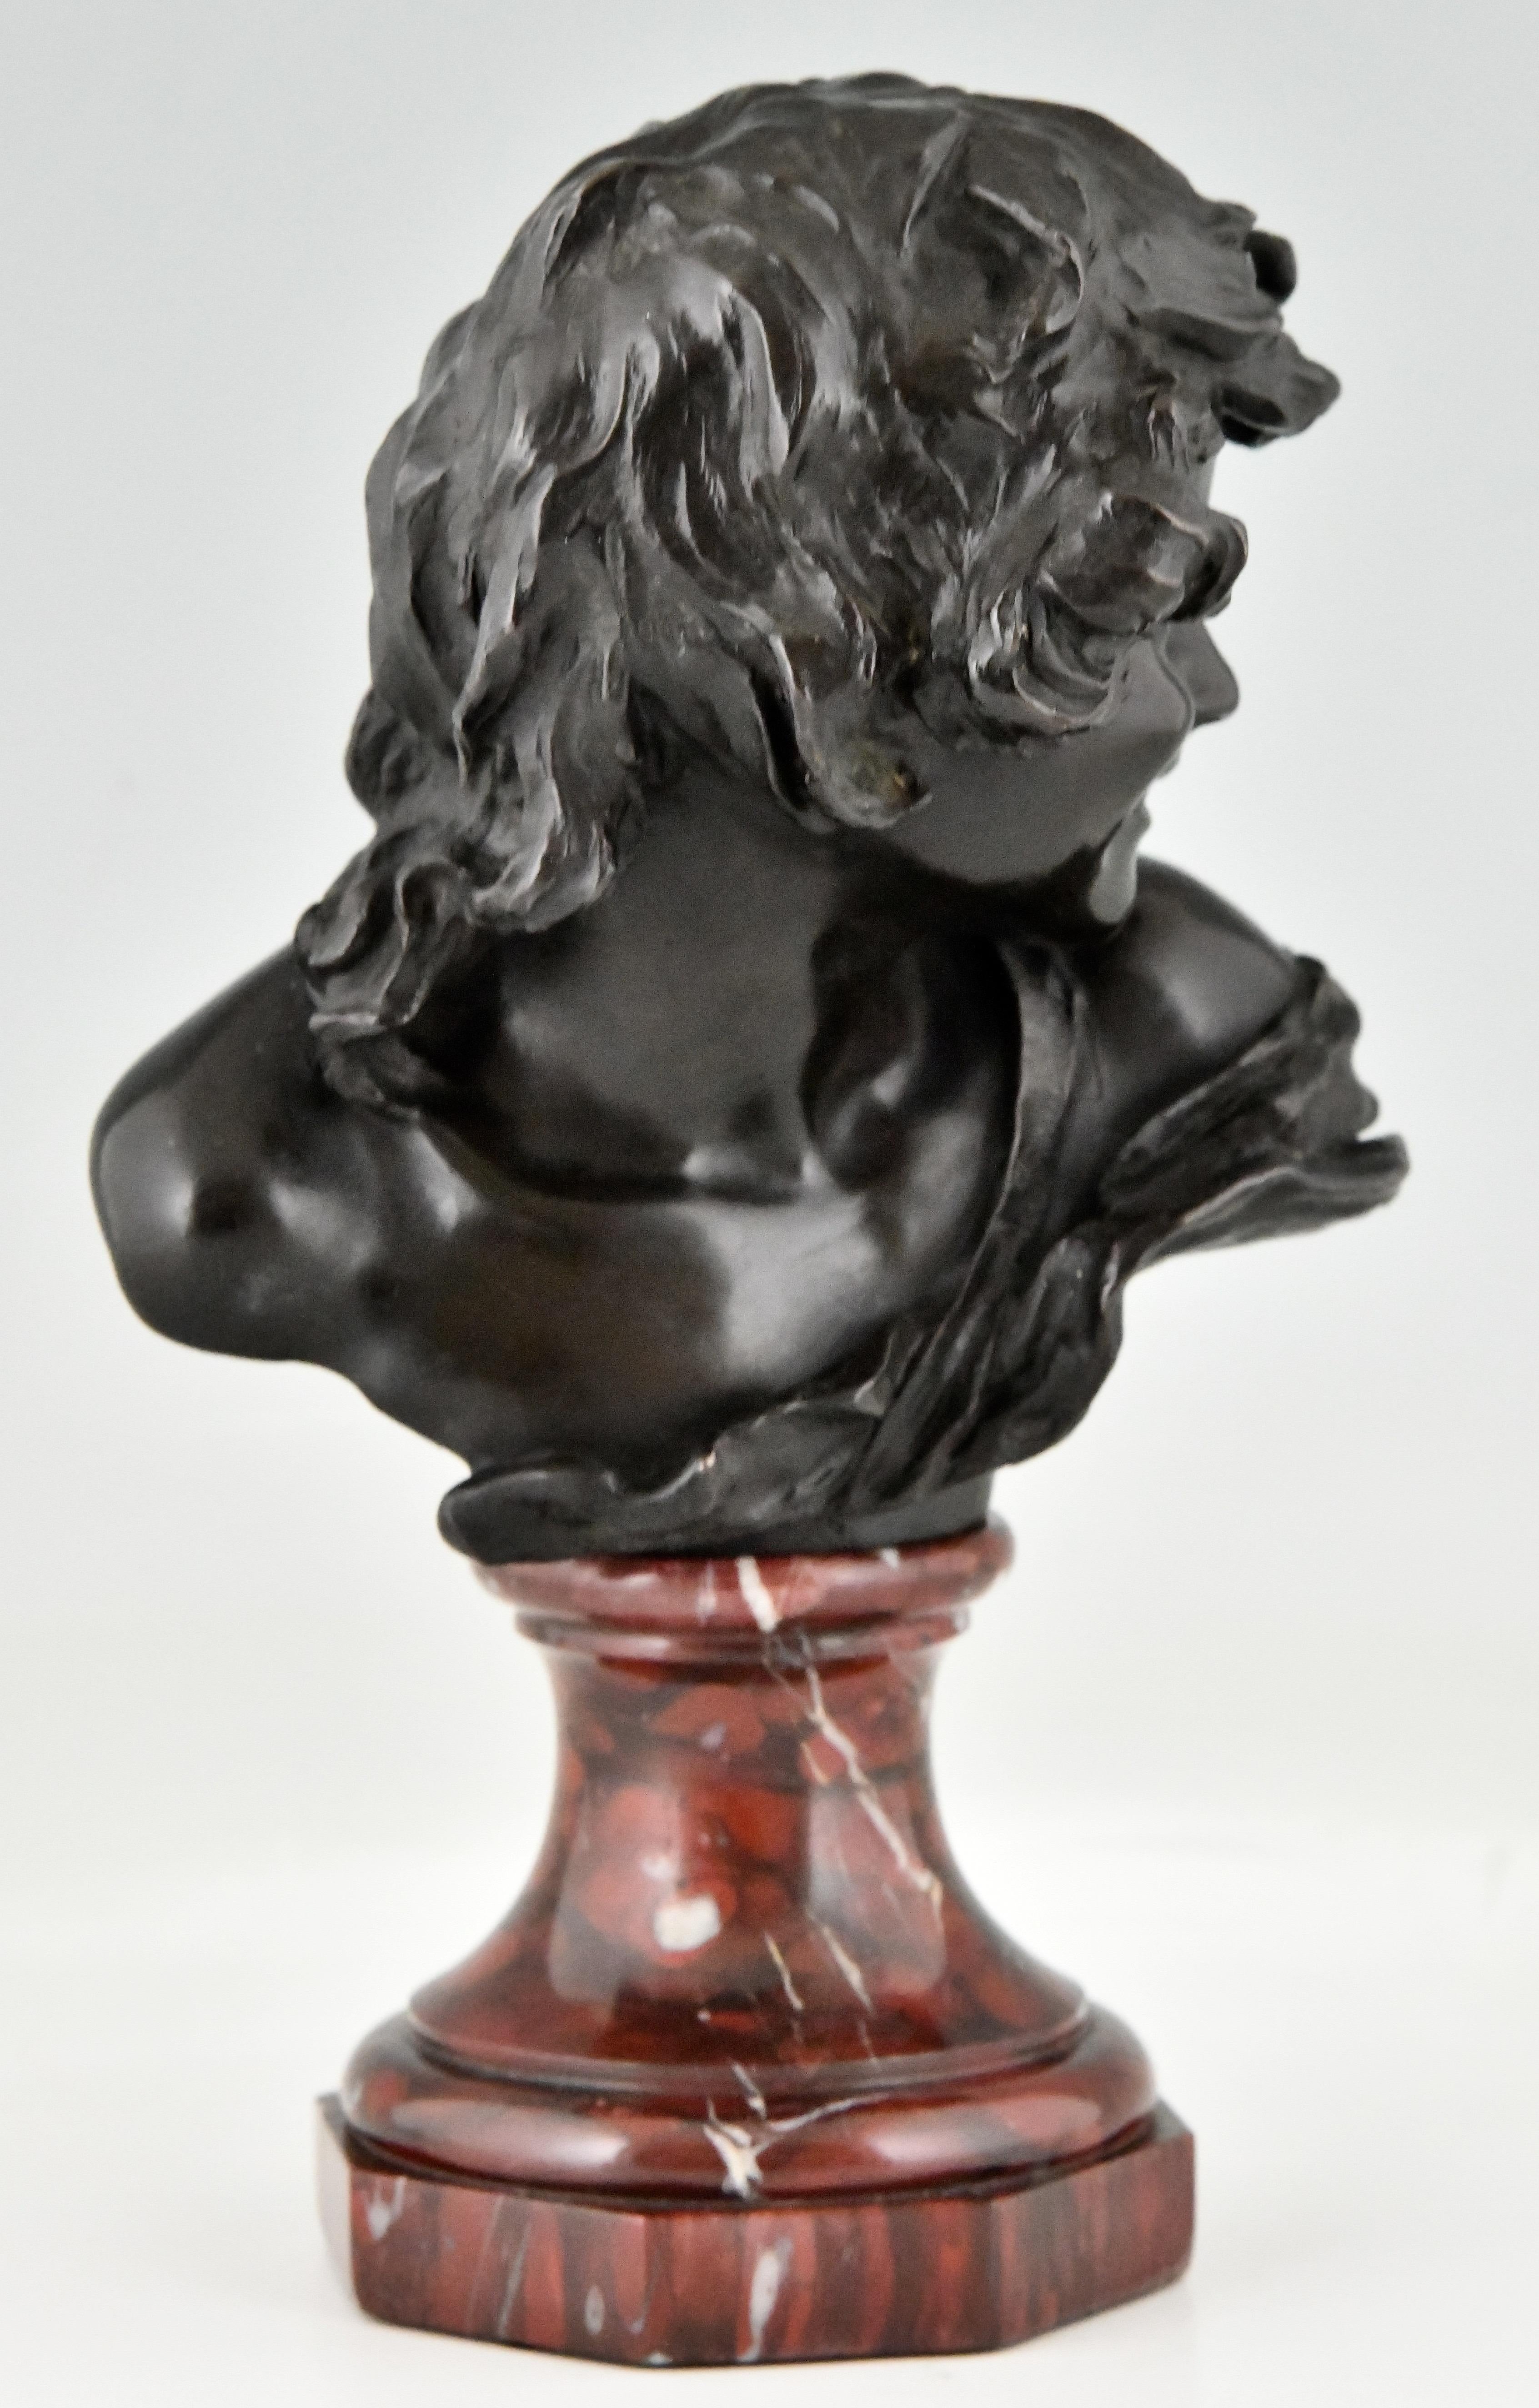 Antique Bronze Bust of a Smiling Child by Injalbert Foundry Mark Siot France 190 In Good Condition For Sale In Antwerp, BE